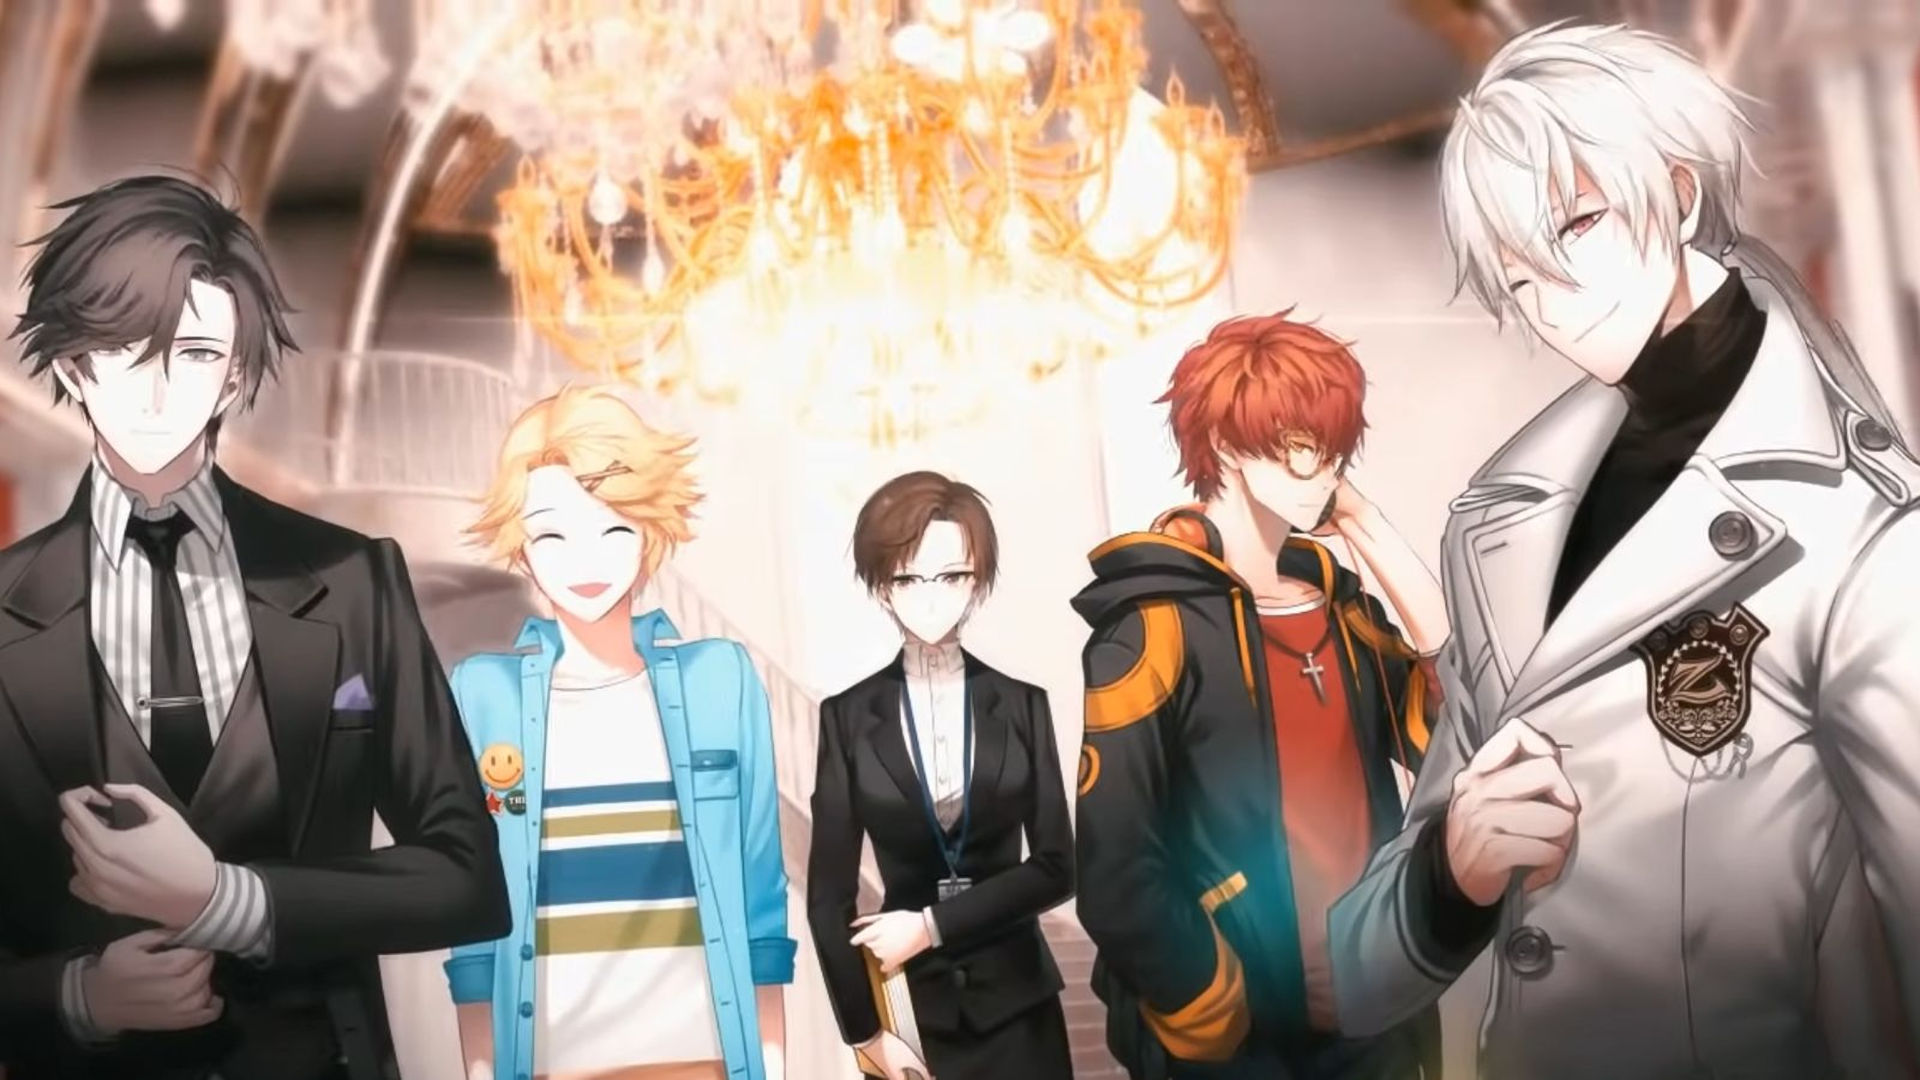 7 Otome Mobile Games You Should Play in 2021